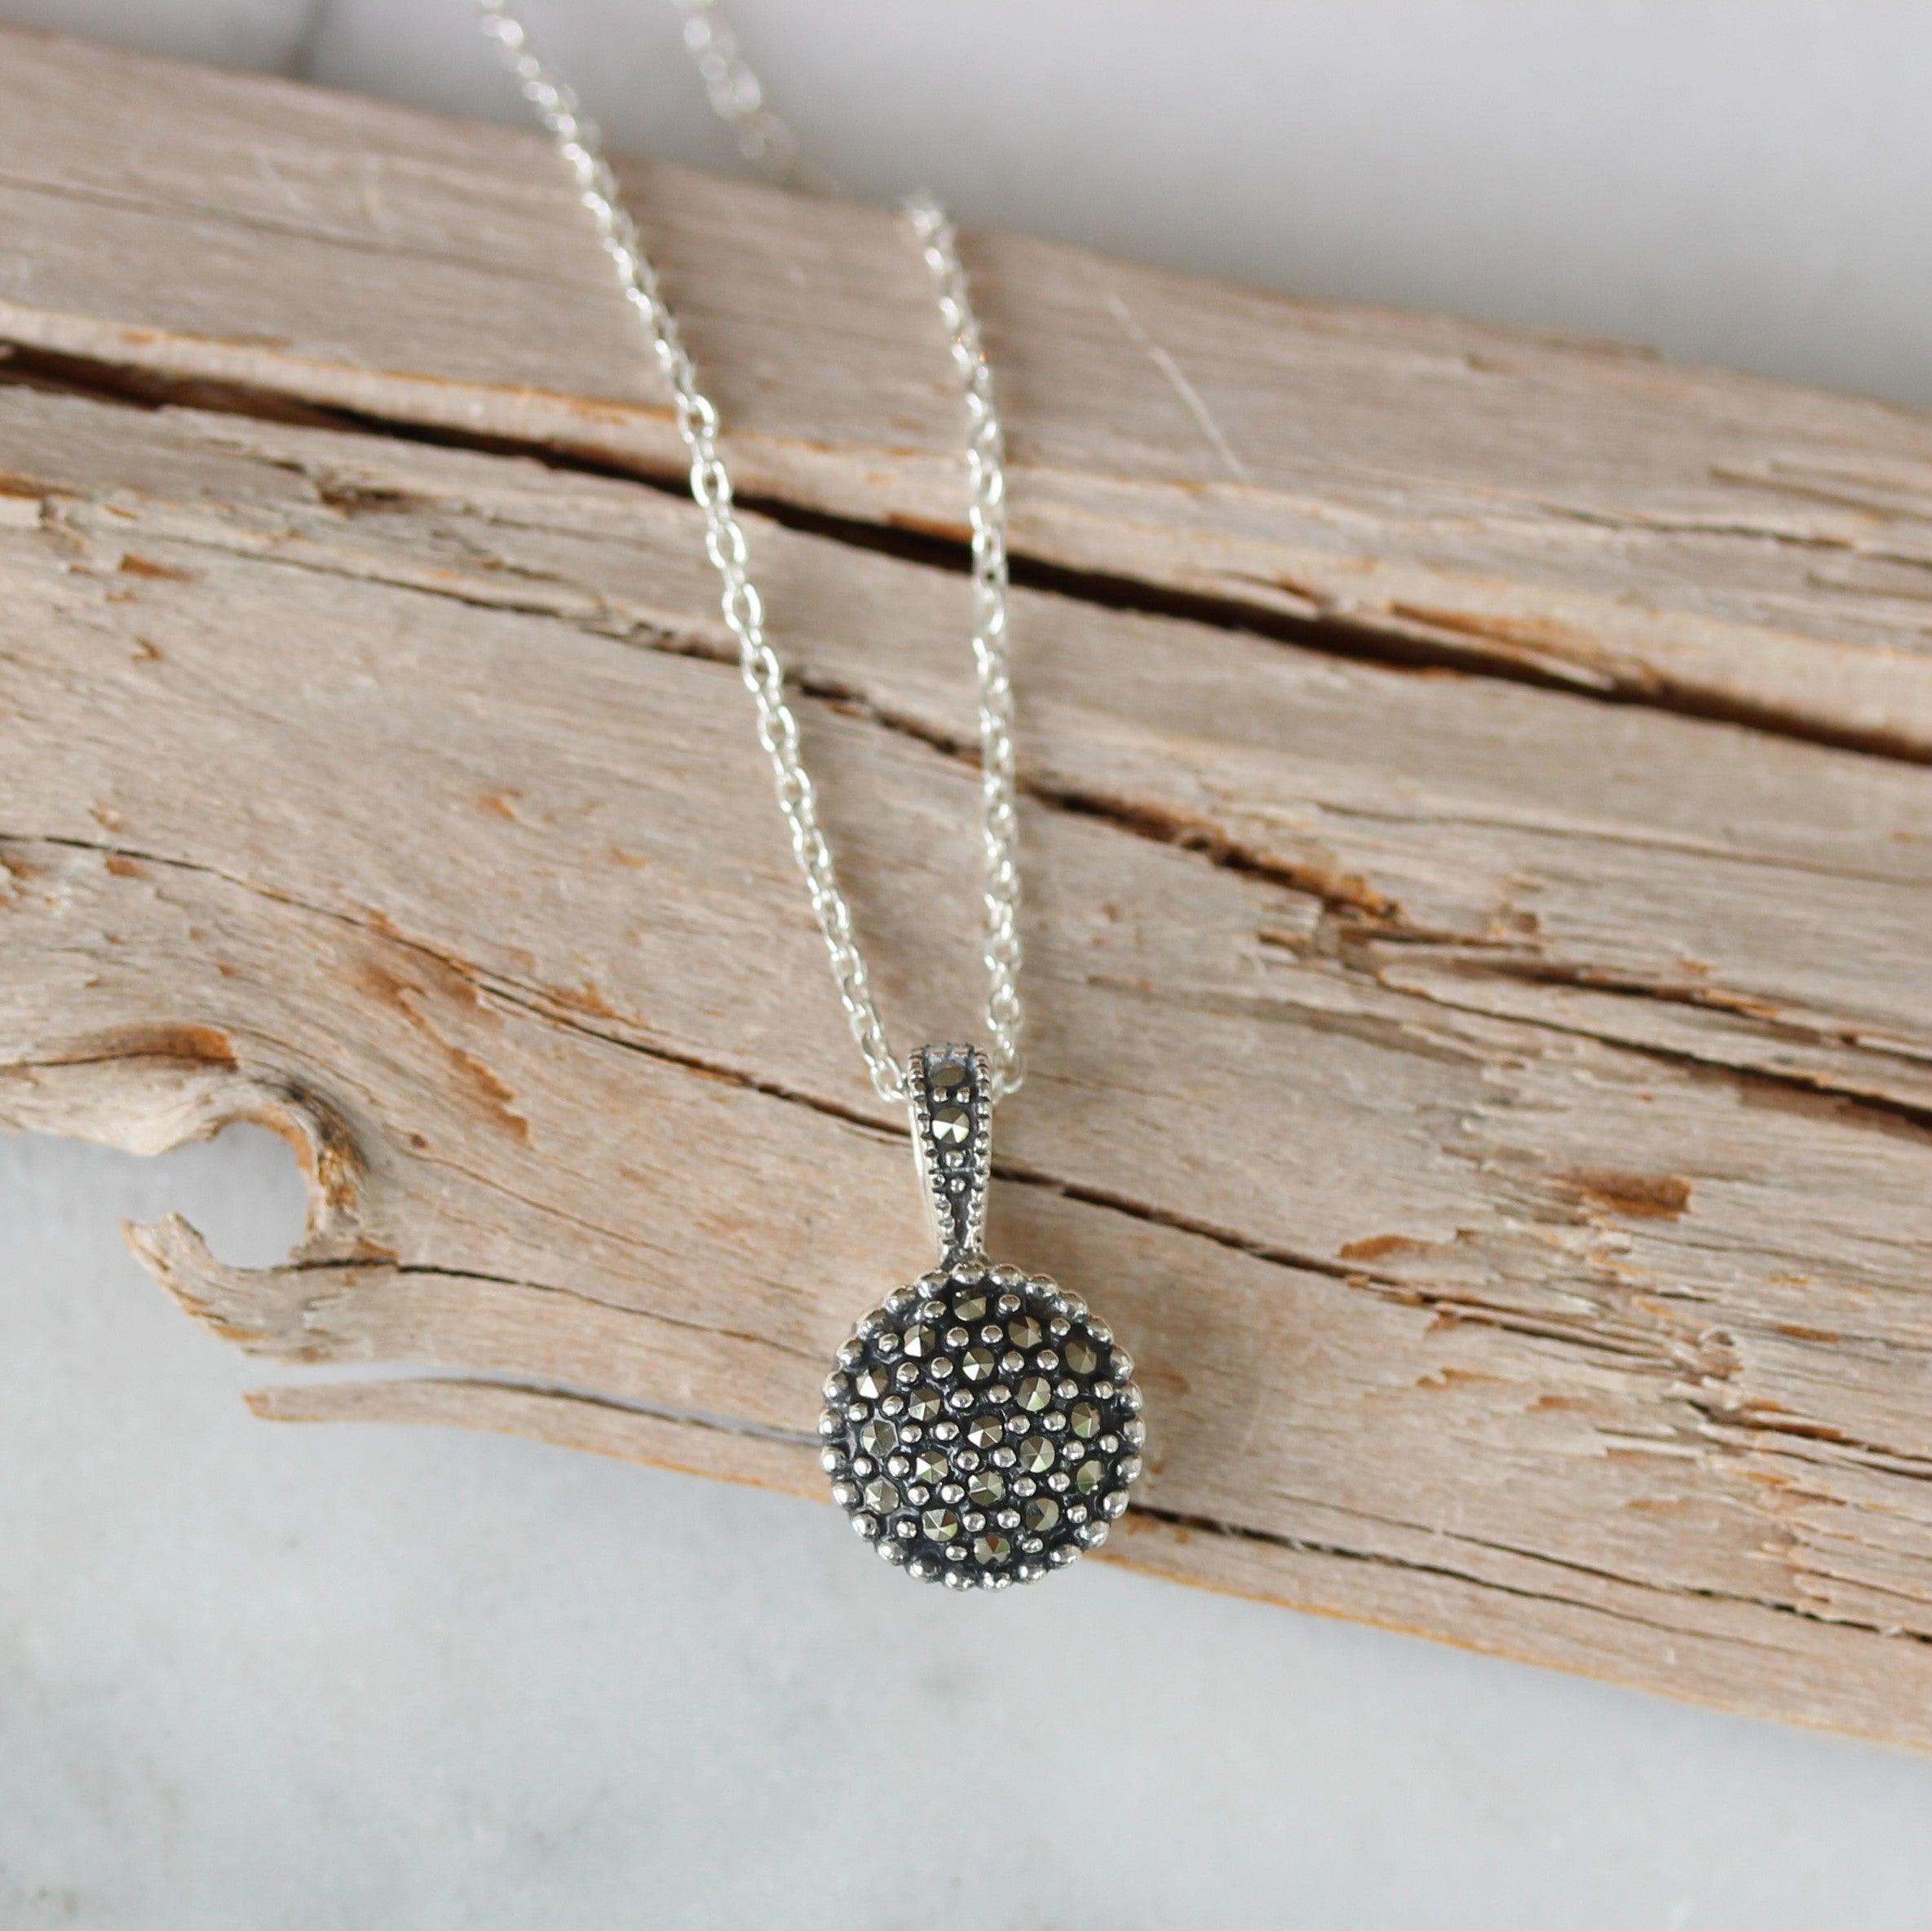 Sterling Silver 9mm Round Marcasite Pendant & Necklace - STERLING SILVER DESIGNS